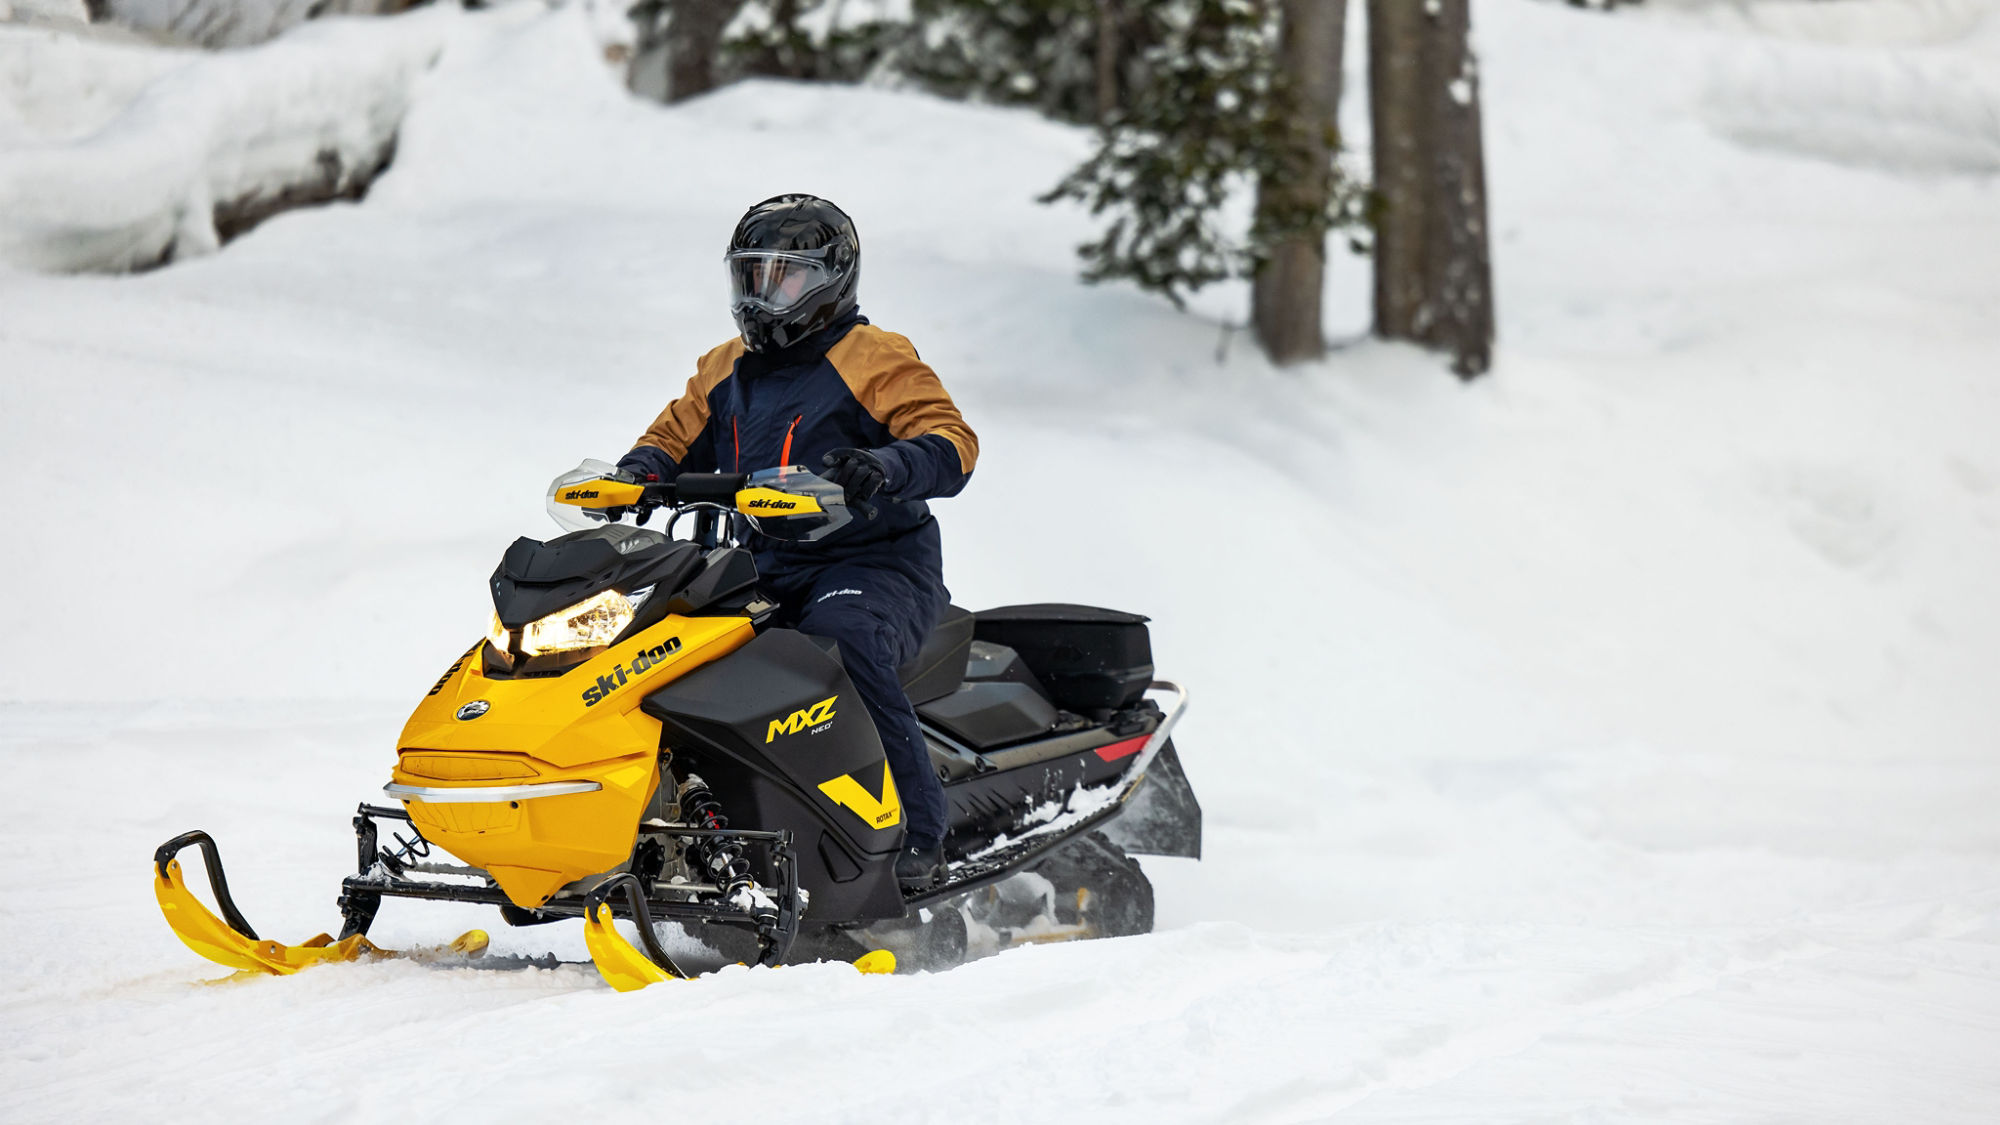 Rider on a MXZ Neo mid-sized snowmobile